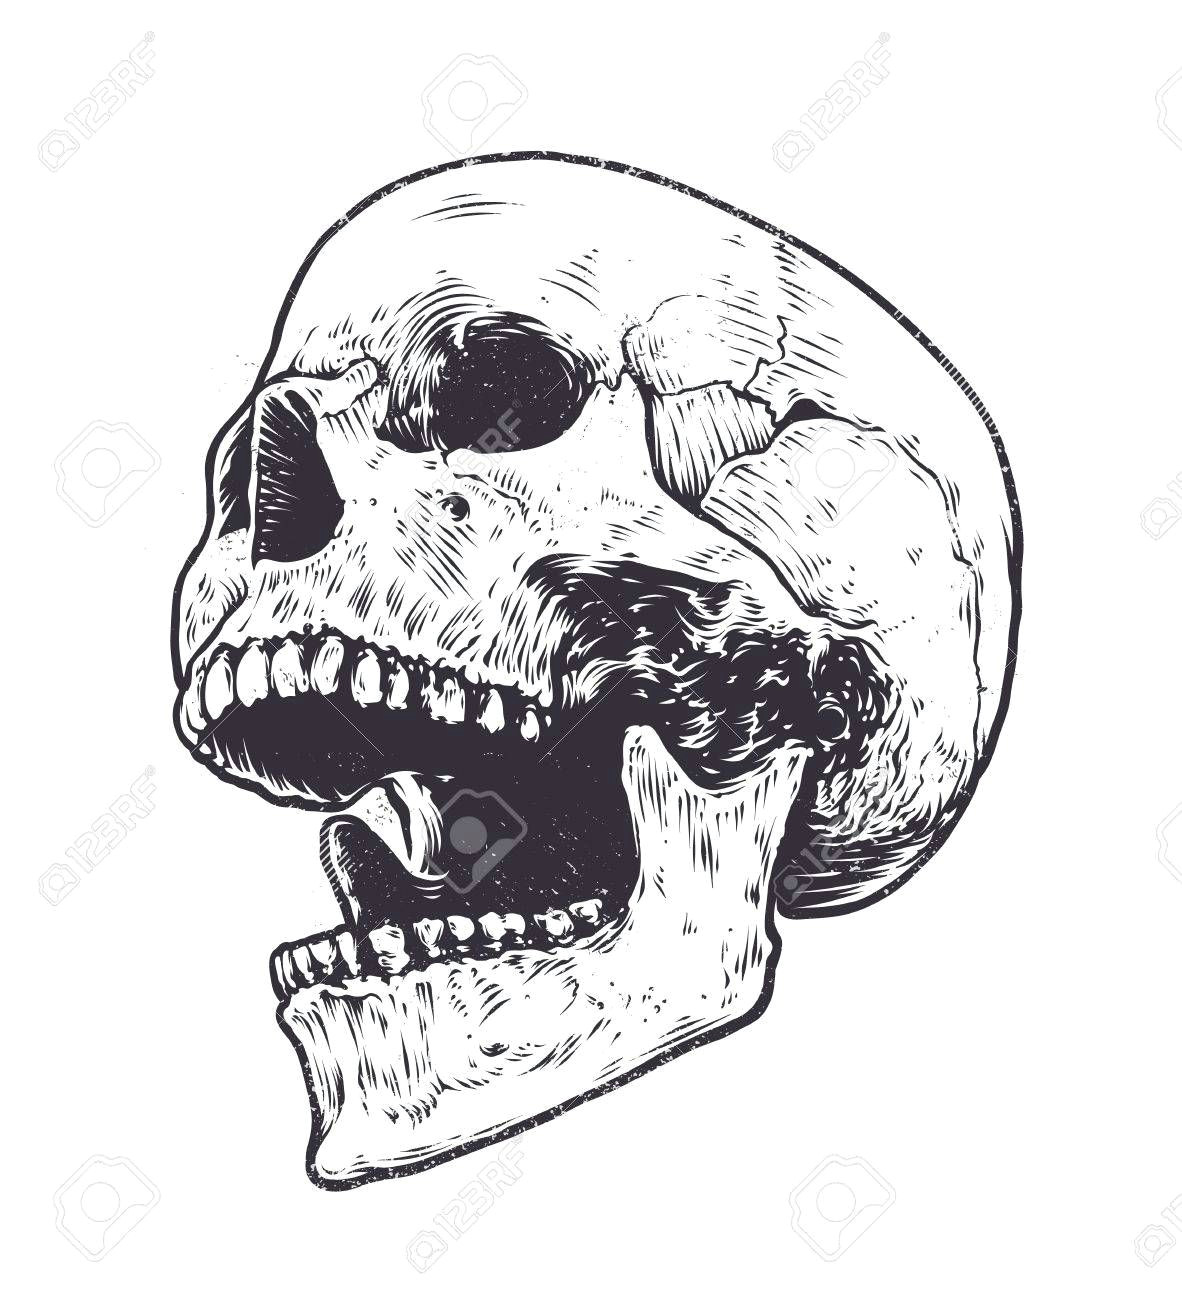 Skull Drawing with Shading Image Result for Skull Open Mouth Drawing Tattoo Projects